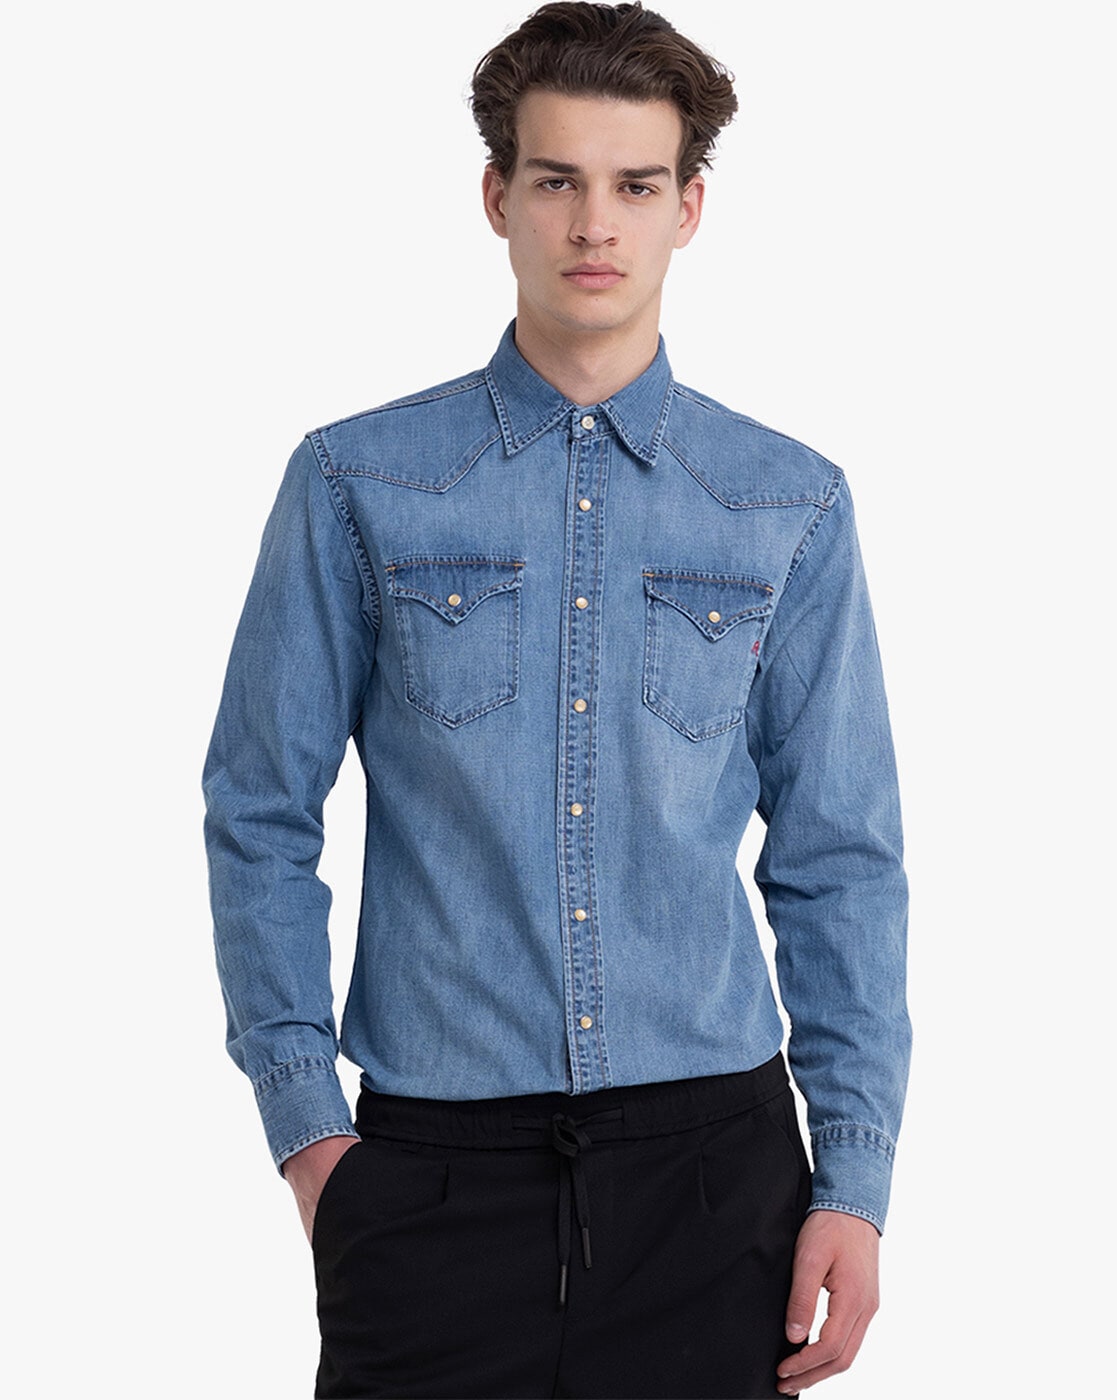 Spring Men's Long Sleeve Denim Shirts Autumn Trend Cotton Loose Casual Shirt  Male Classic Thin Jean Jacket Dark Blue M at Amazon Men's Clothing store